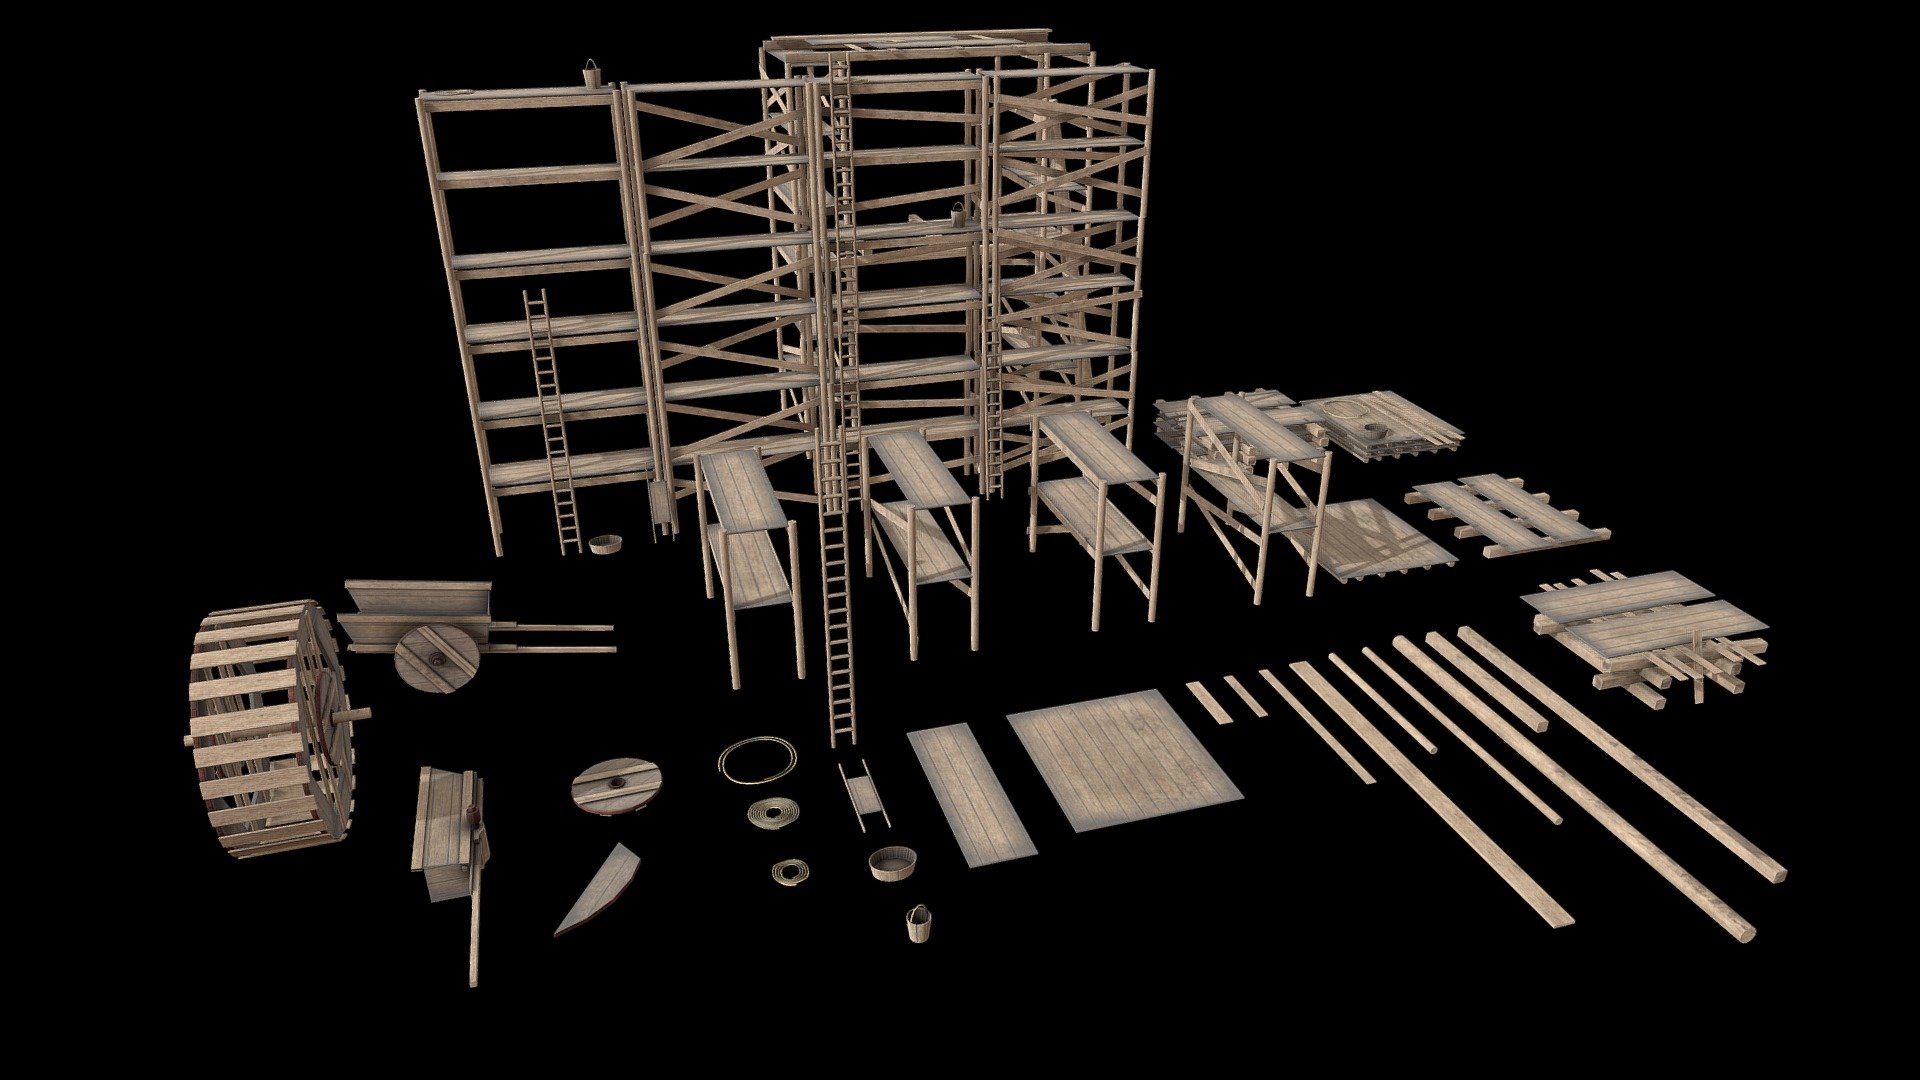 Low-poly one-texture asset to construct medieval scaffolds, bridges, cranes, fortifications etc 3d model